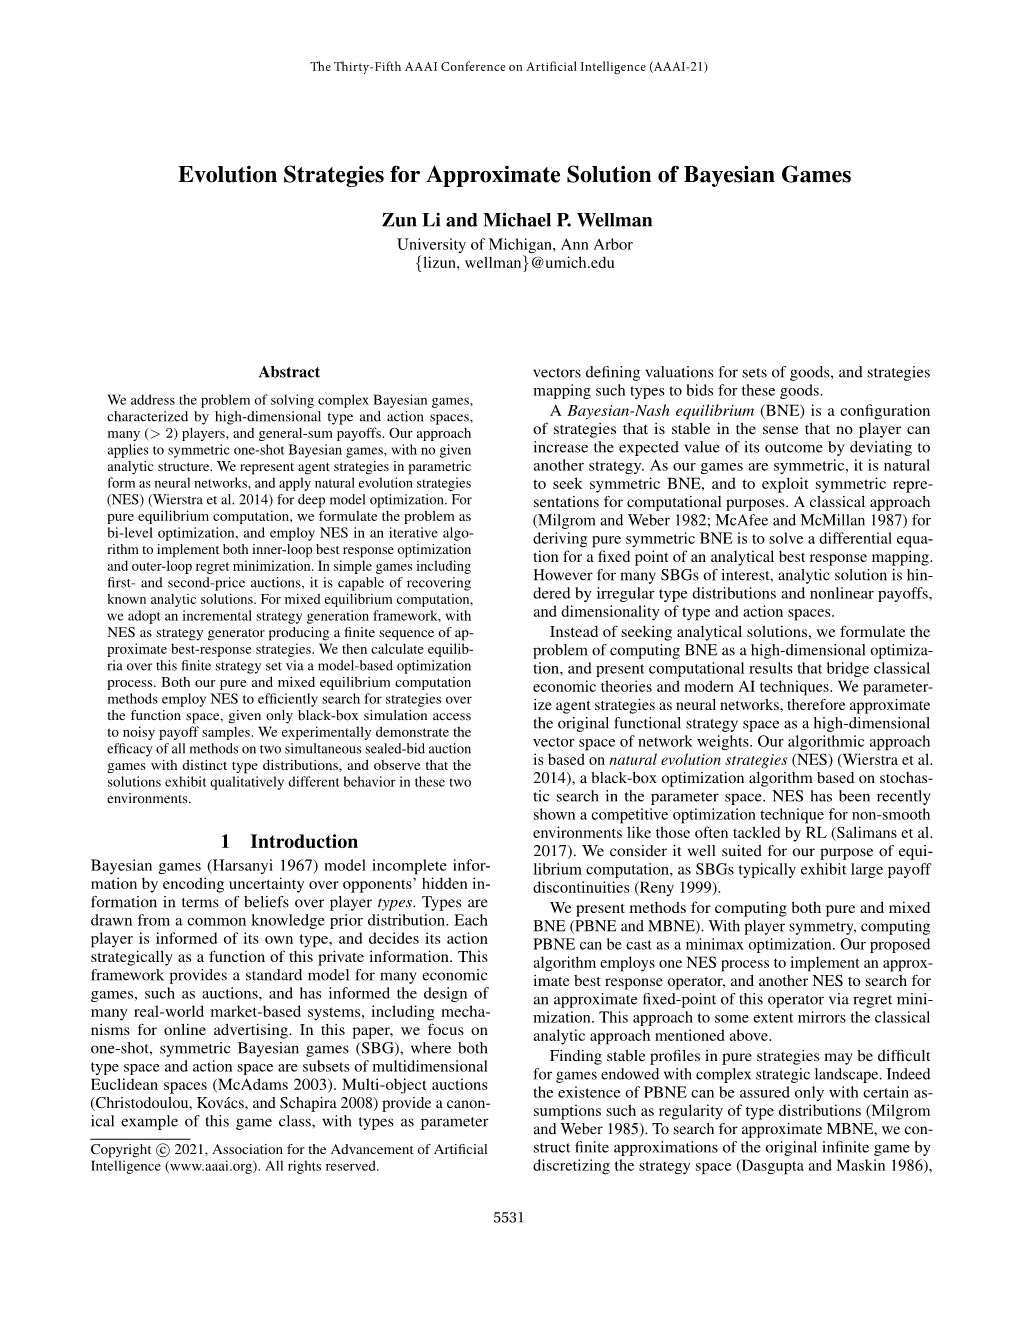 Evolution Strategies for Approximate Solution of Bayesian Games